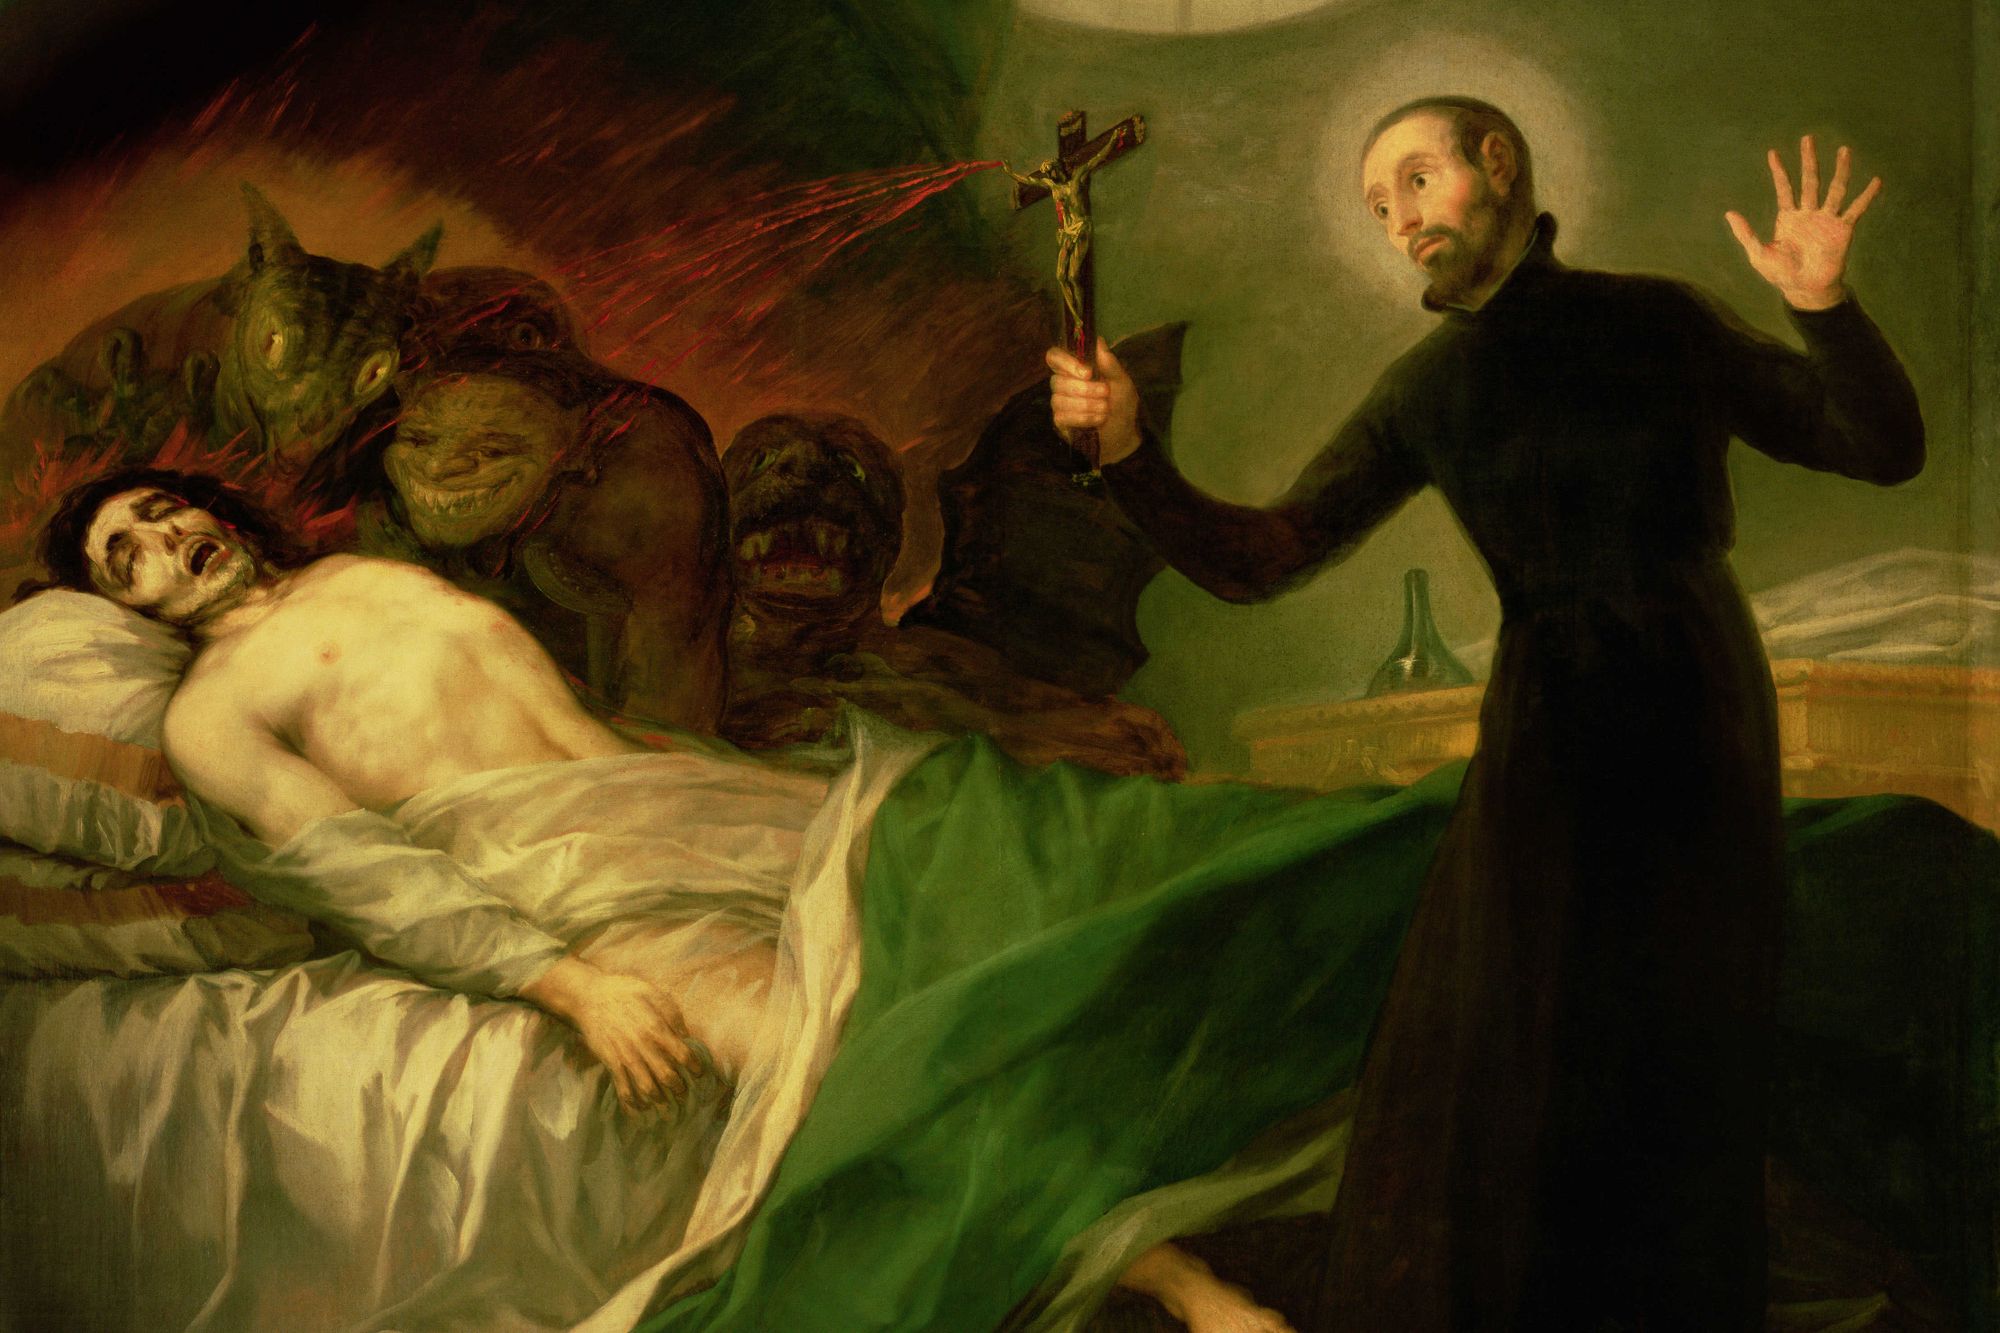                               The Devil within: Is the heyday of Possessions, Demons and Exorcism back?                             
                              